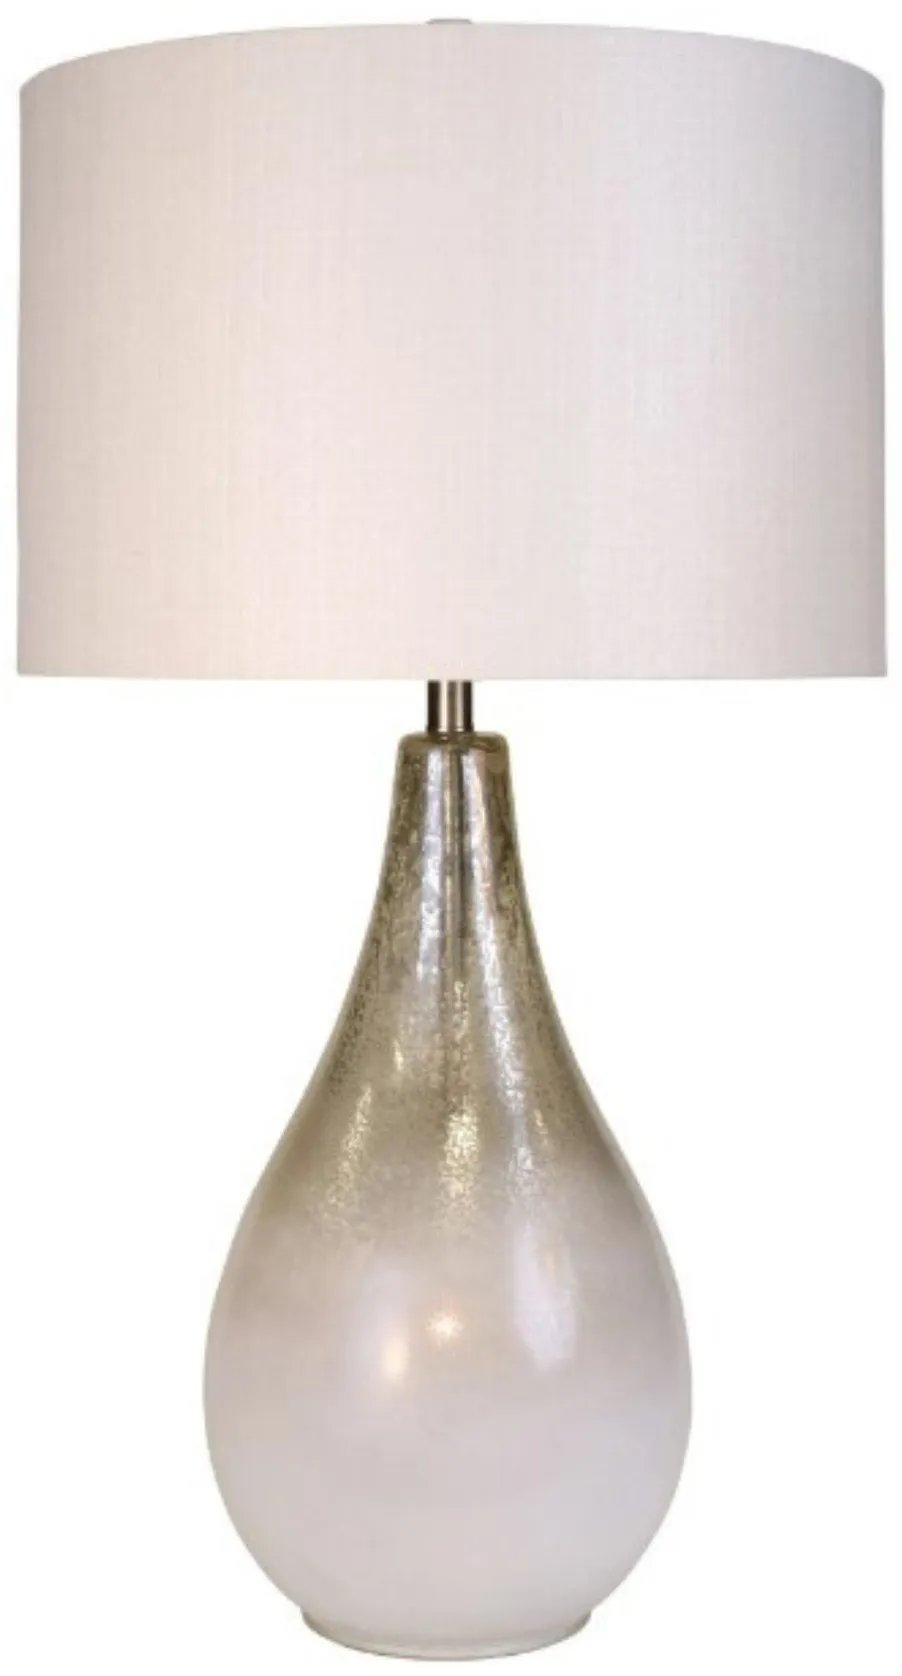 Gold and White Mercury Glass Table Lamp 34"H